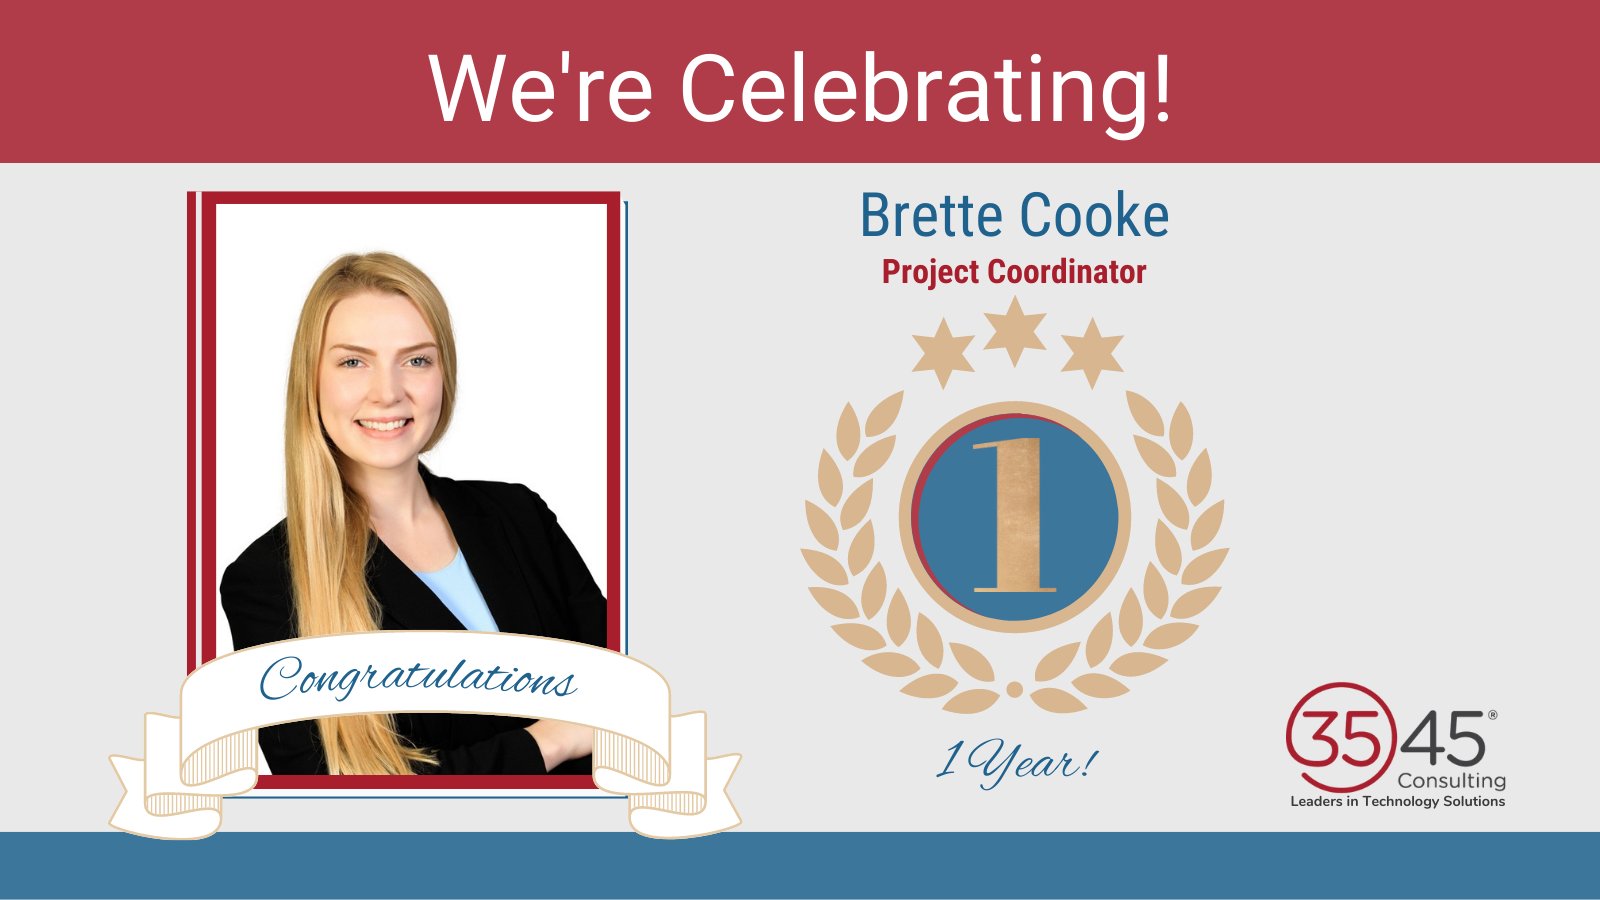 3545 Consulting Global on X: Today we are celebrating the #WorkAnniversary  of @BretteC_3545 our Project Coordinator extraordinaire! Until she came  along, we had no idea how much we needed her! More than